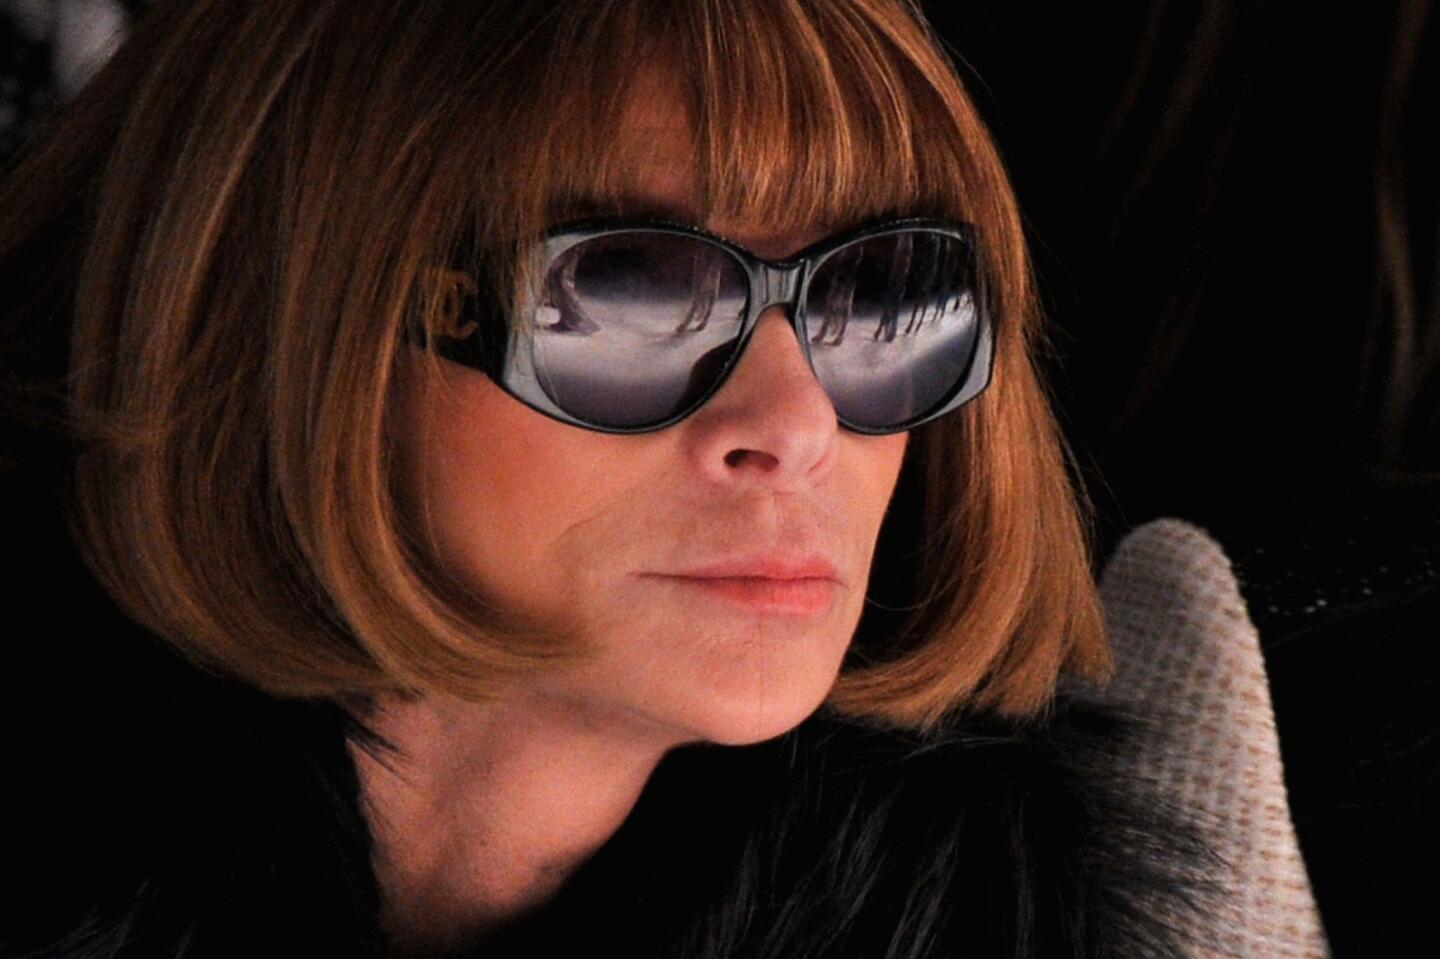 Vogue Editor in Chief Anna Wintour made the list of top fundraisers released by the Obama reelection campaign. Holding star-studded fundraising events in June, September and October, she raised so much money -- more than half a million dollars -- that rumors swirled that she could be rewarded with an ambassadorship to France or England. (June, September, October)